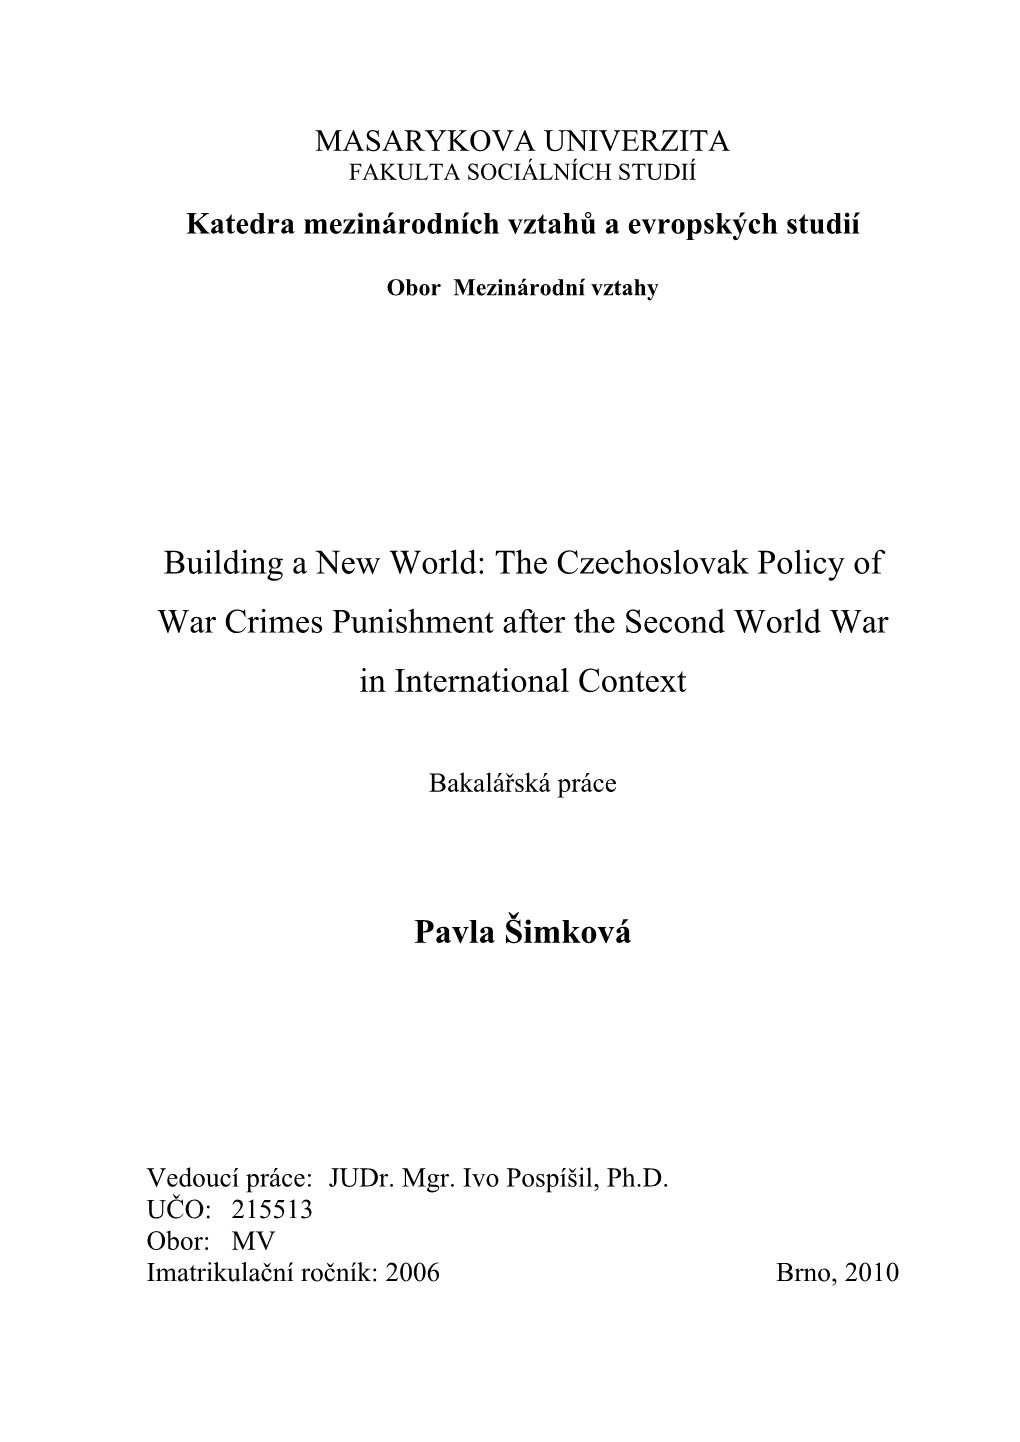 The Czechoslovak Policy of War Crimes Punishment After the Second World War in International Context Pavla